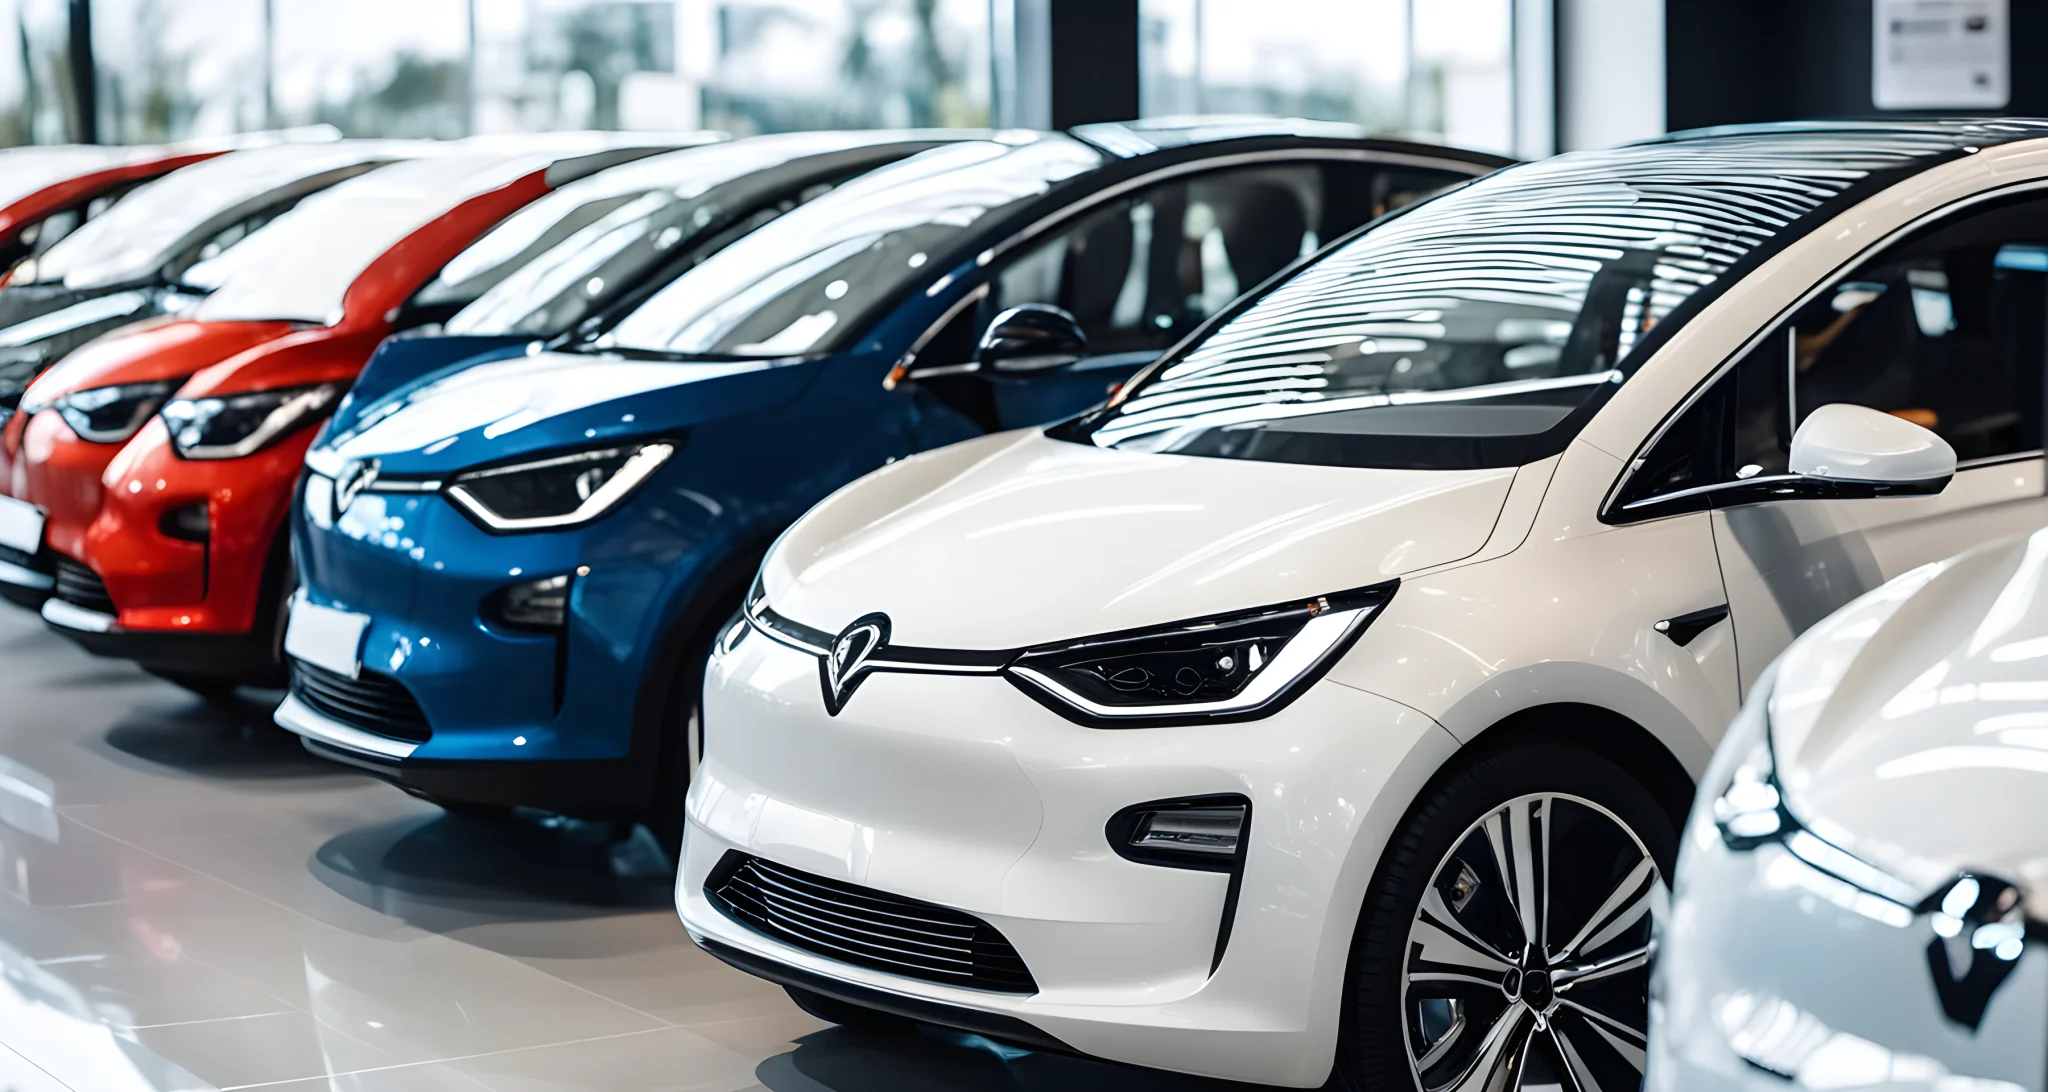 The image shows a variety of electric car models lined up in a dealership showroom, with price tags prominently displayed on each vehicle.